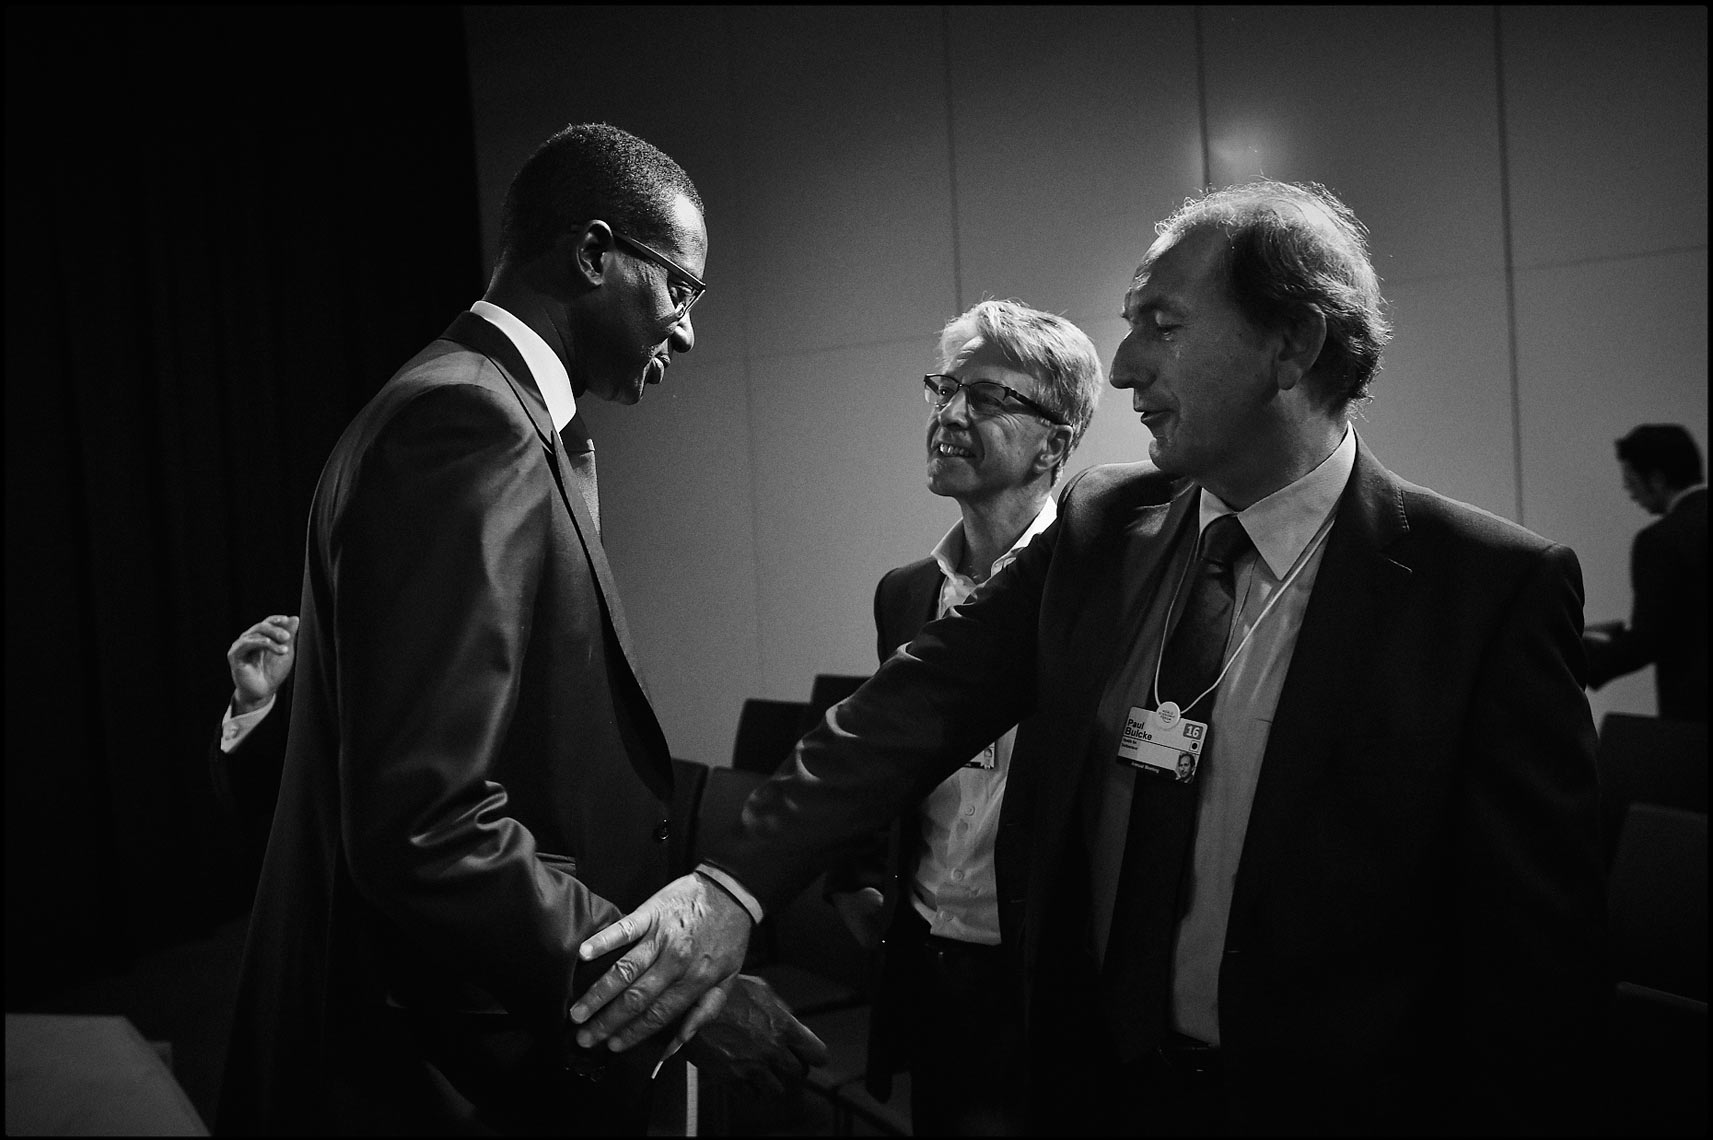 Swiss bank Credit Suisse CEO Tidjane Thiam (L) and Nestle CEO Paul Bulcke